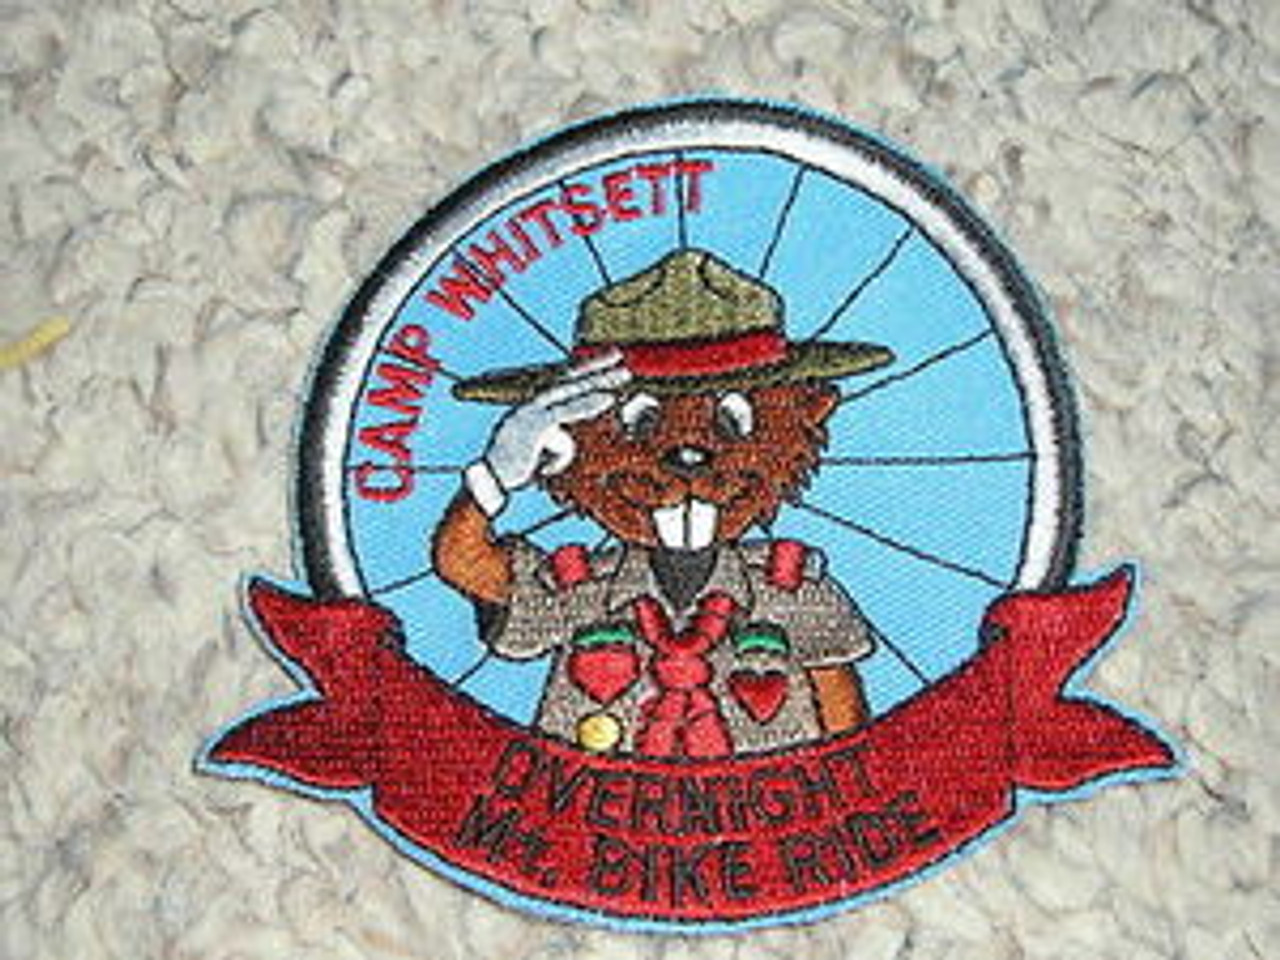 2000's Camp Whitsett Overnight Mtn Bike Ride Patch - Scout